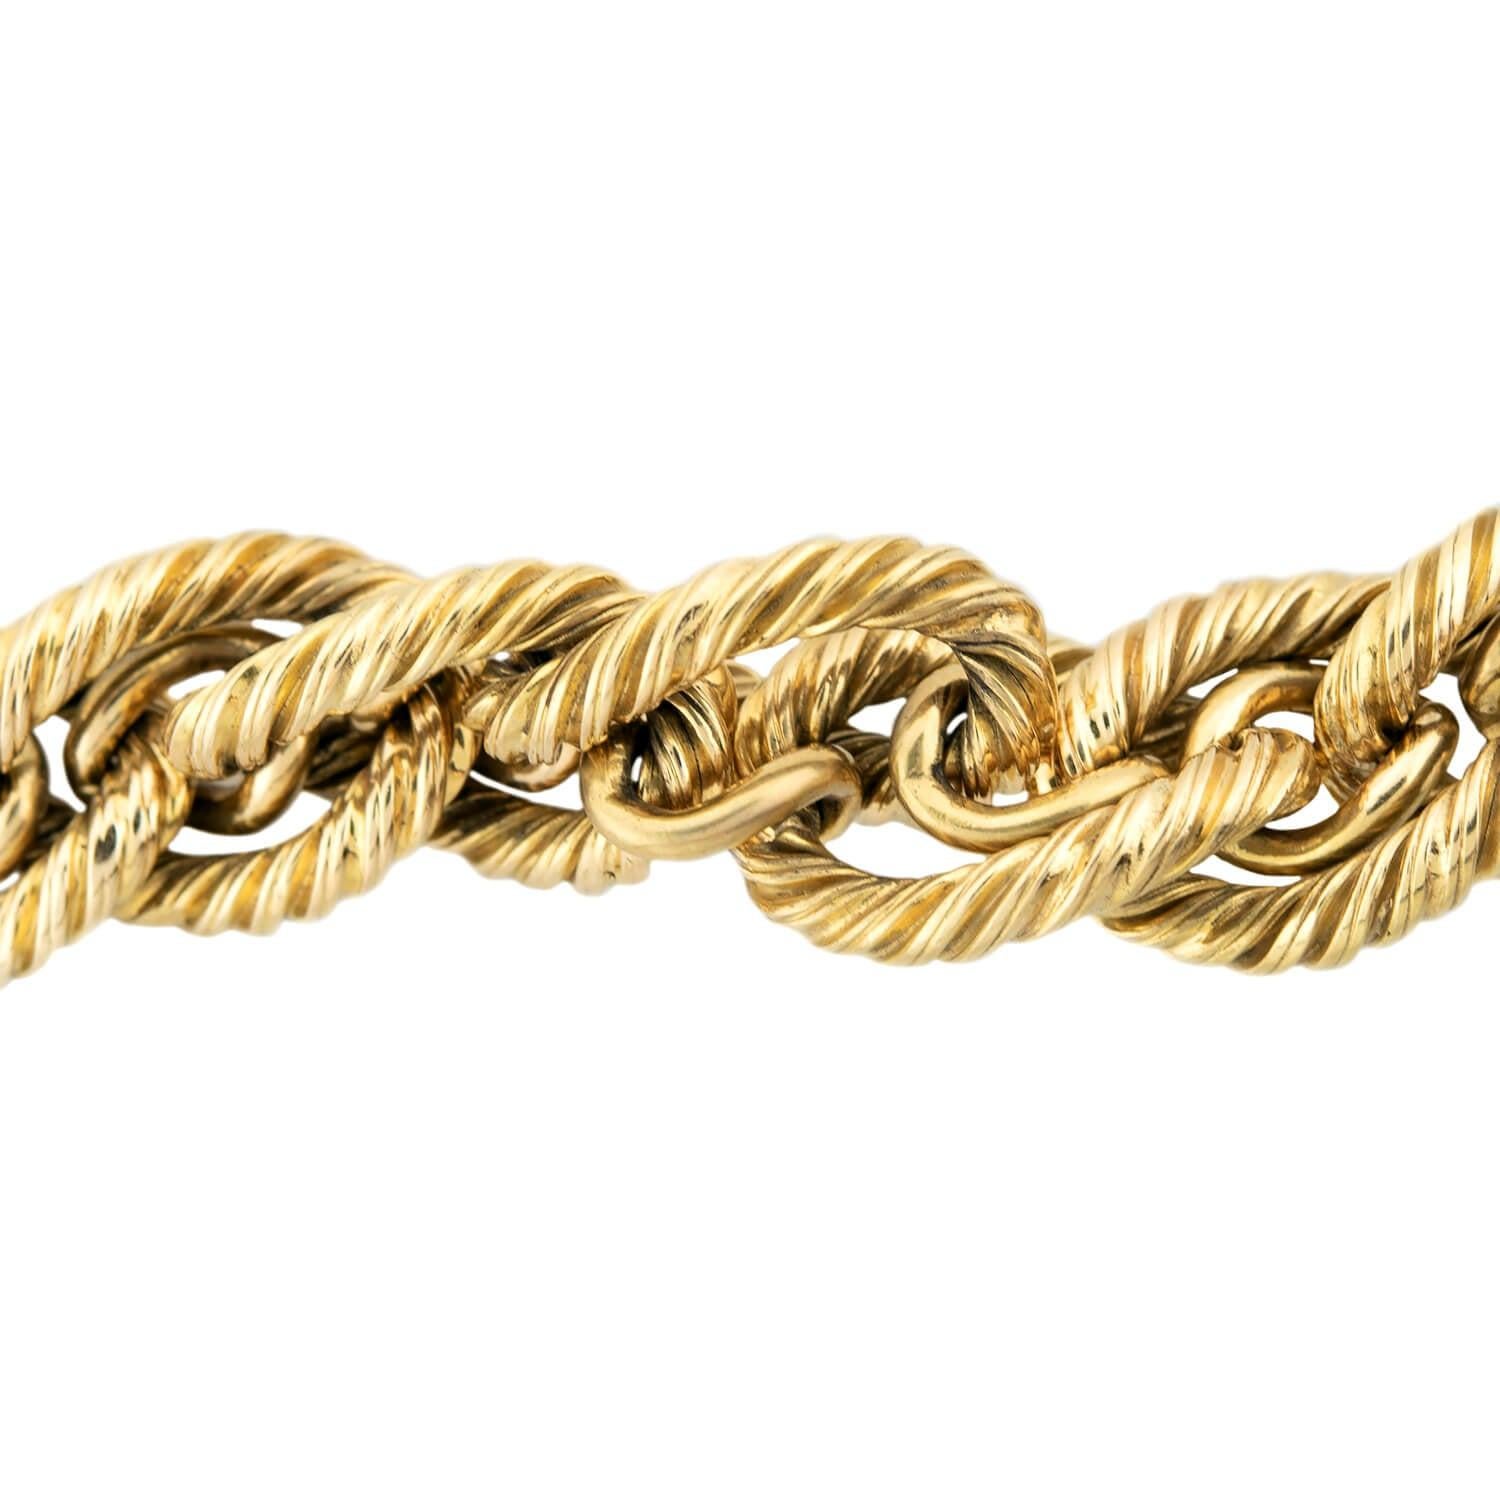 TIFFANY & CO. Vintage 18k Gold Twisted Curb Chain Bracelet 57.0dwt In Good Condition For Sale In Narberth, PA